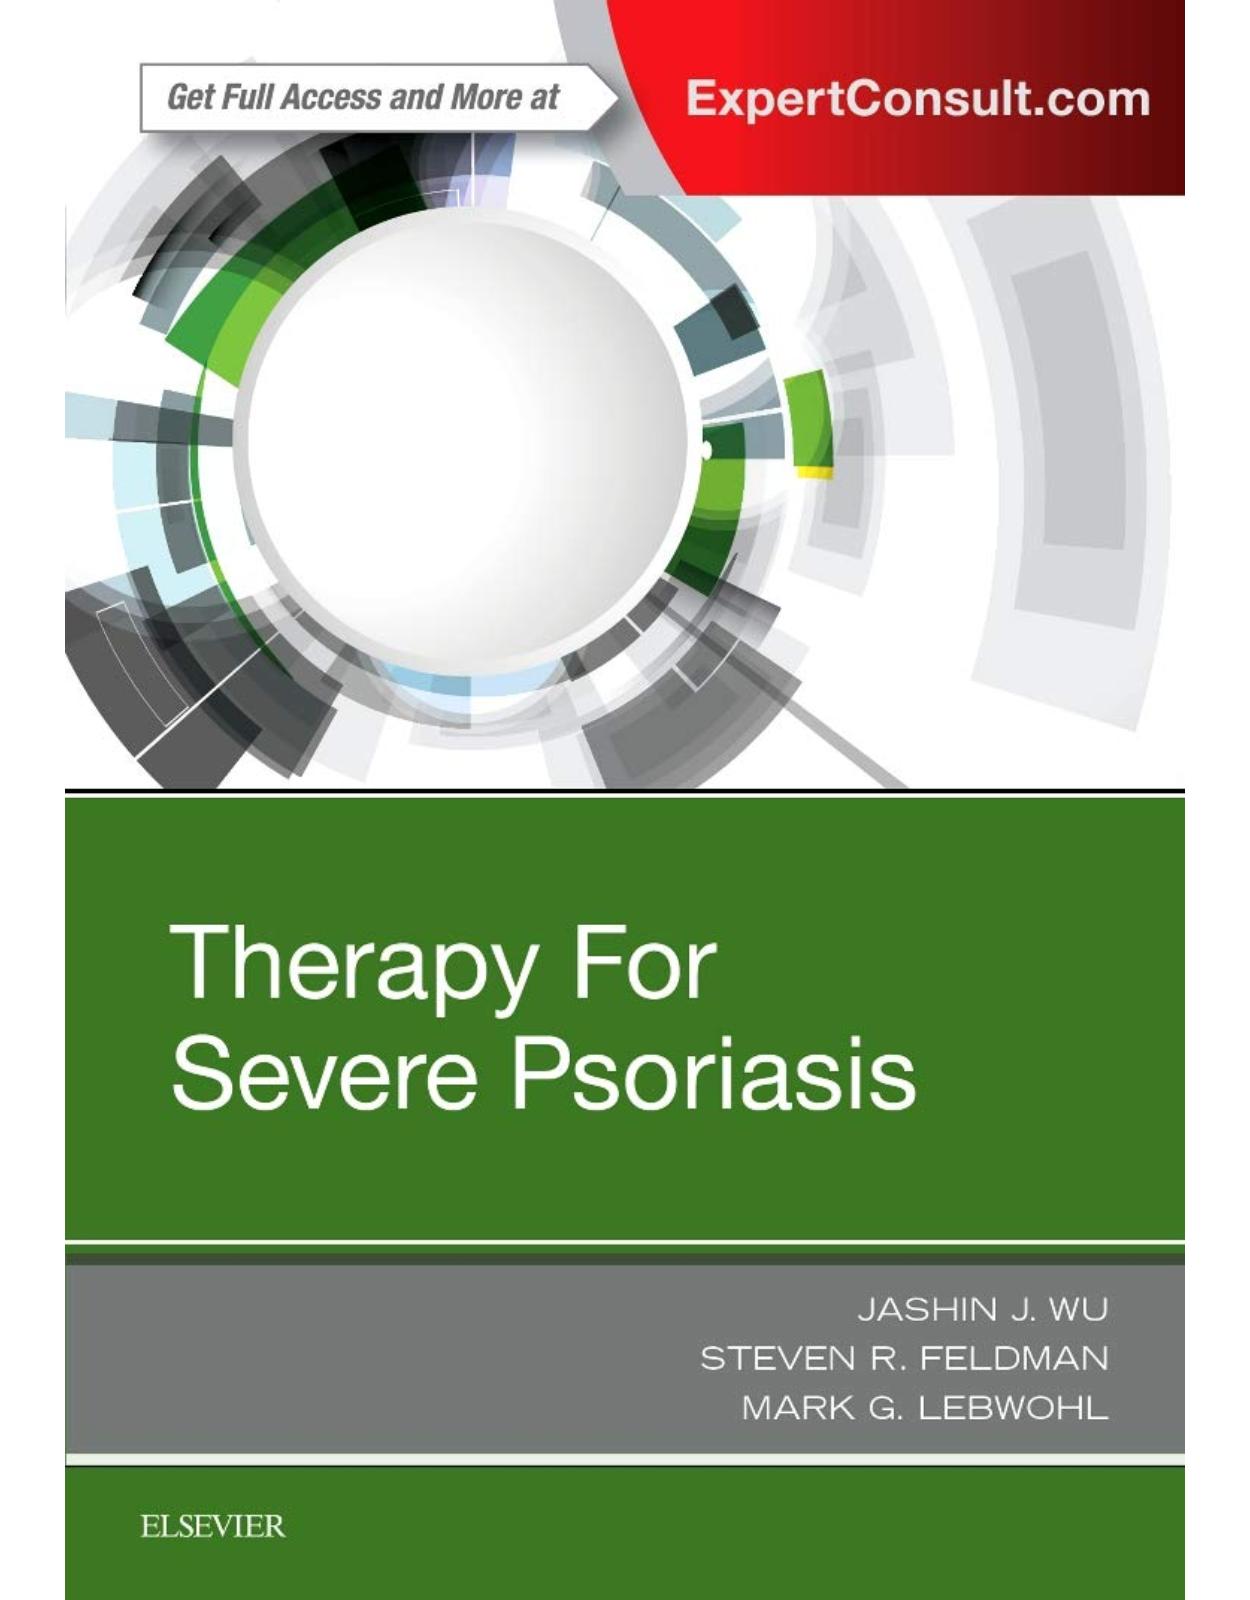 Therapy for Severe Psoriasis